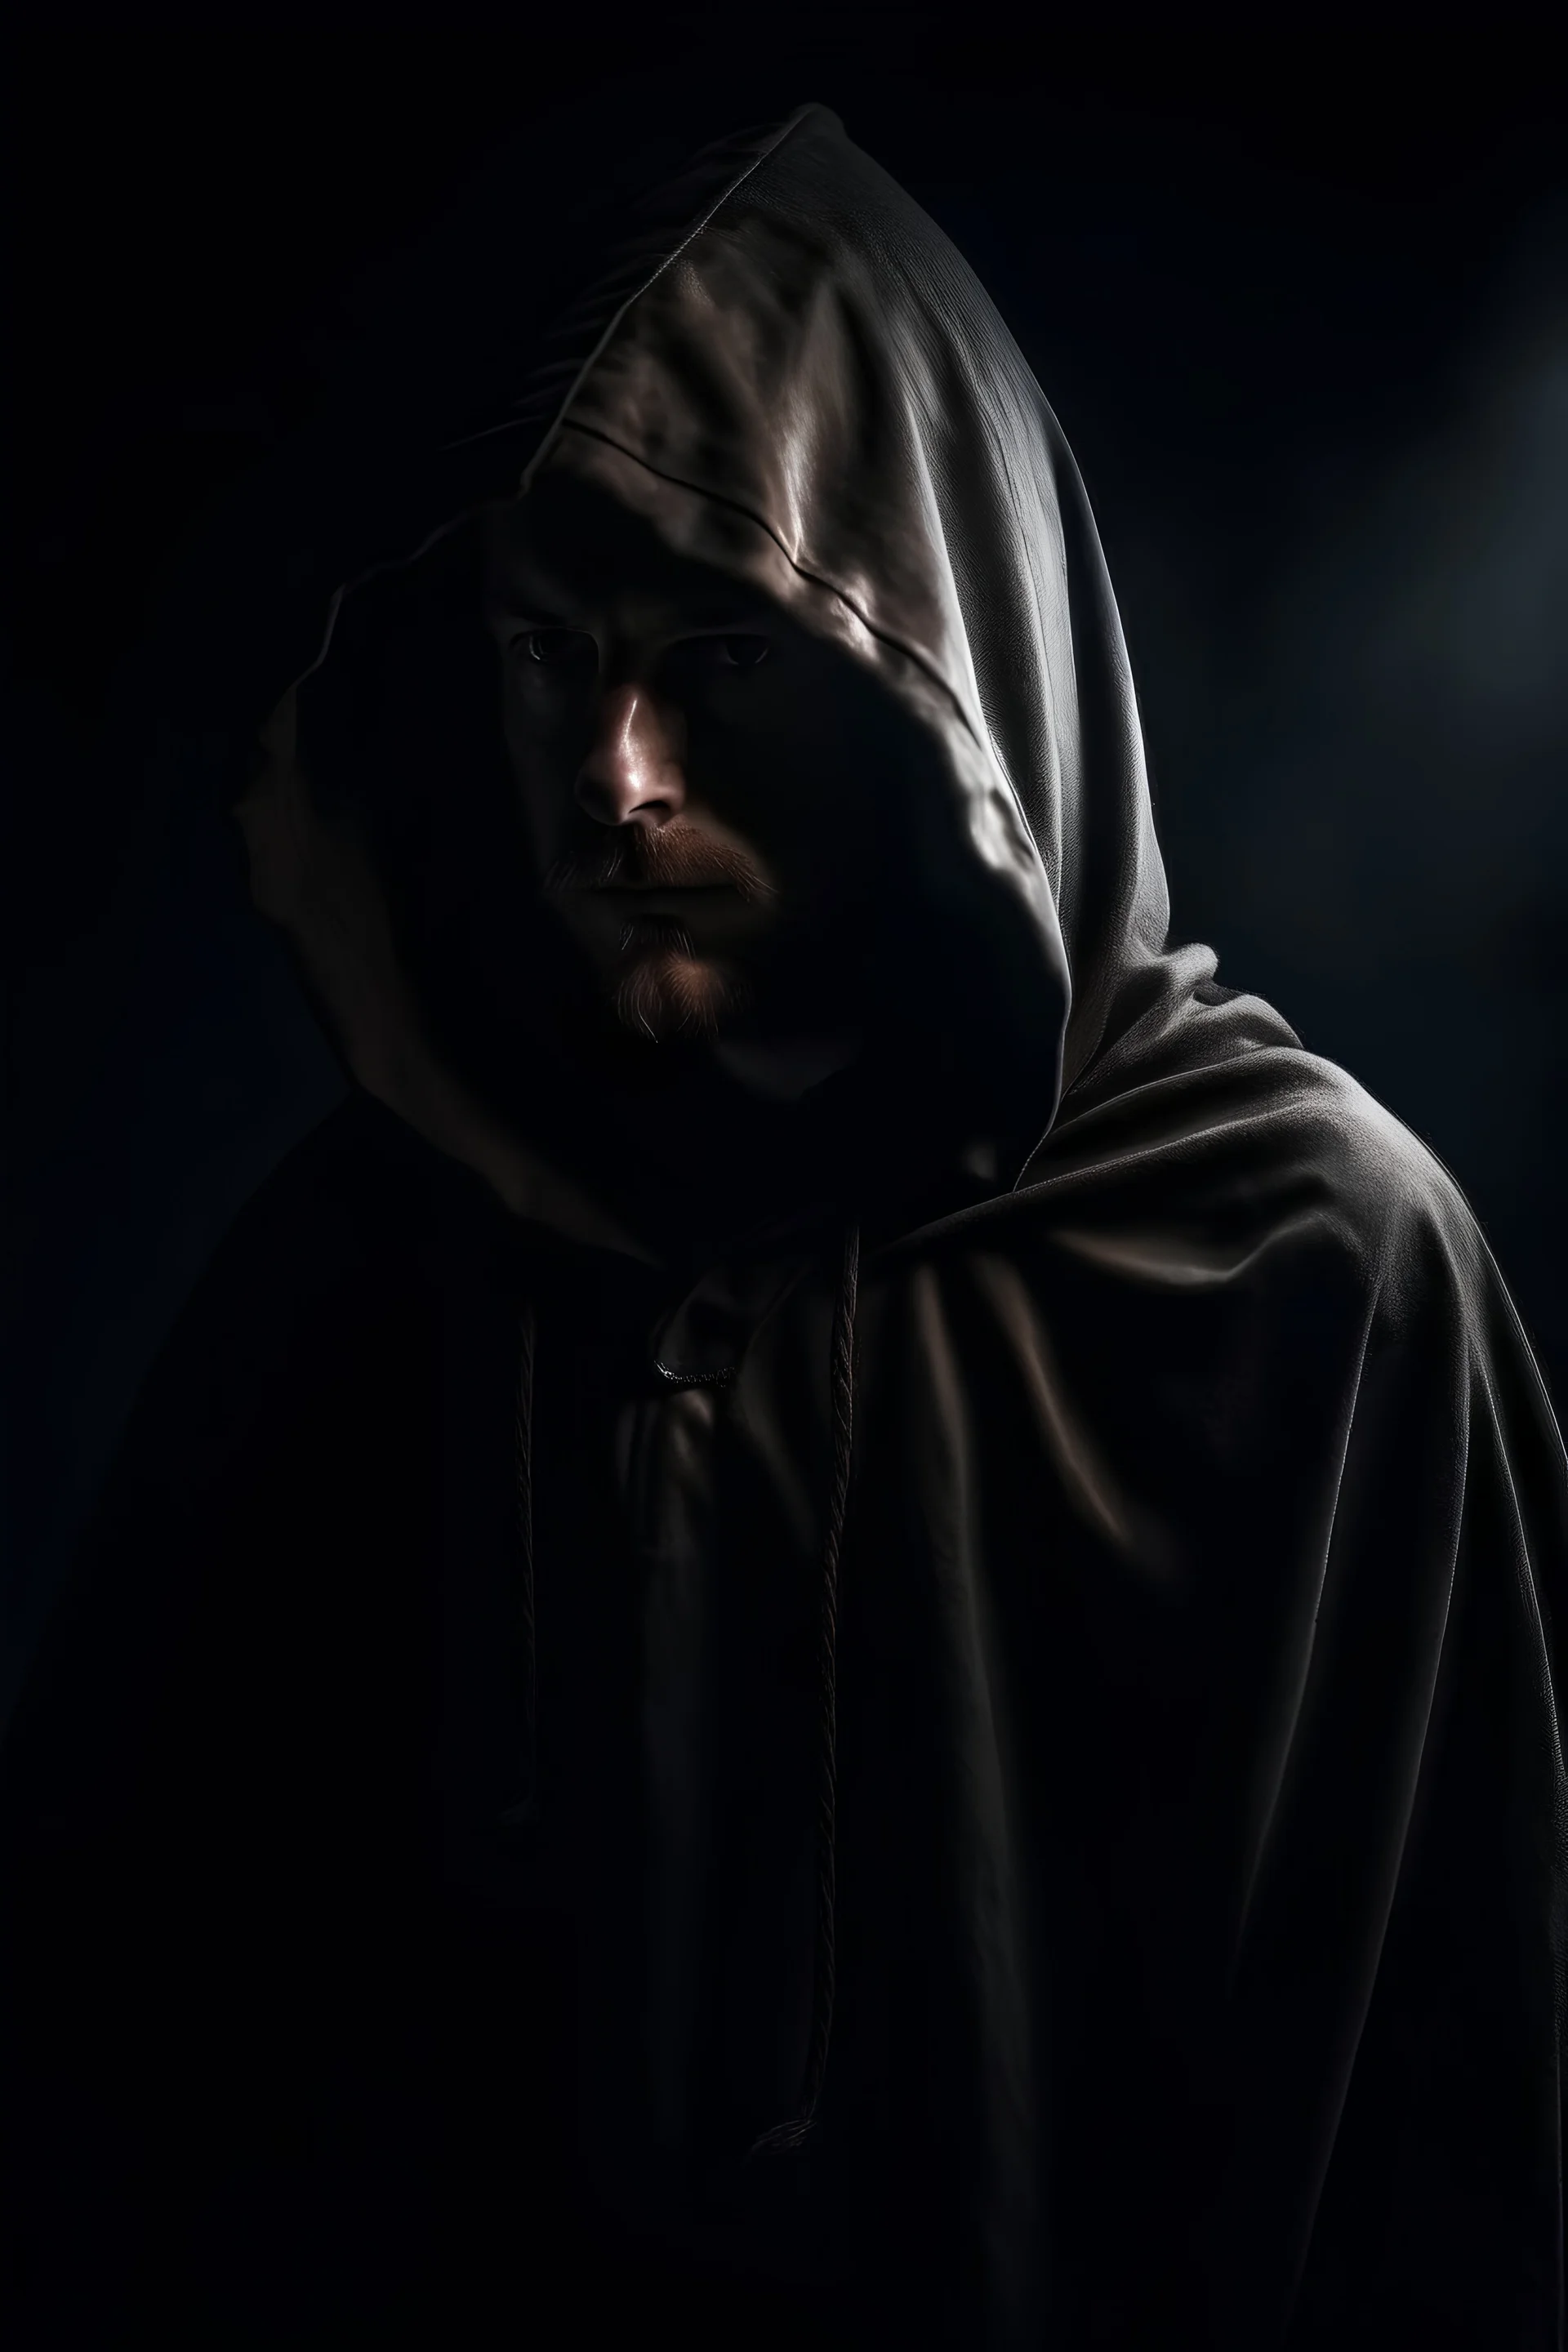 a hunter in a cape with a hood against the darkness